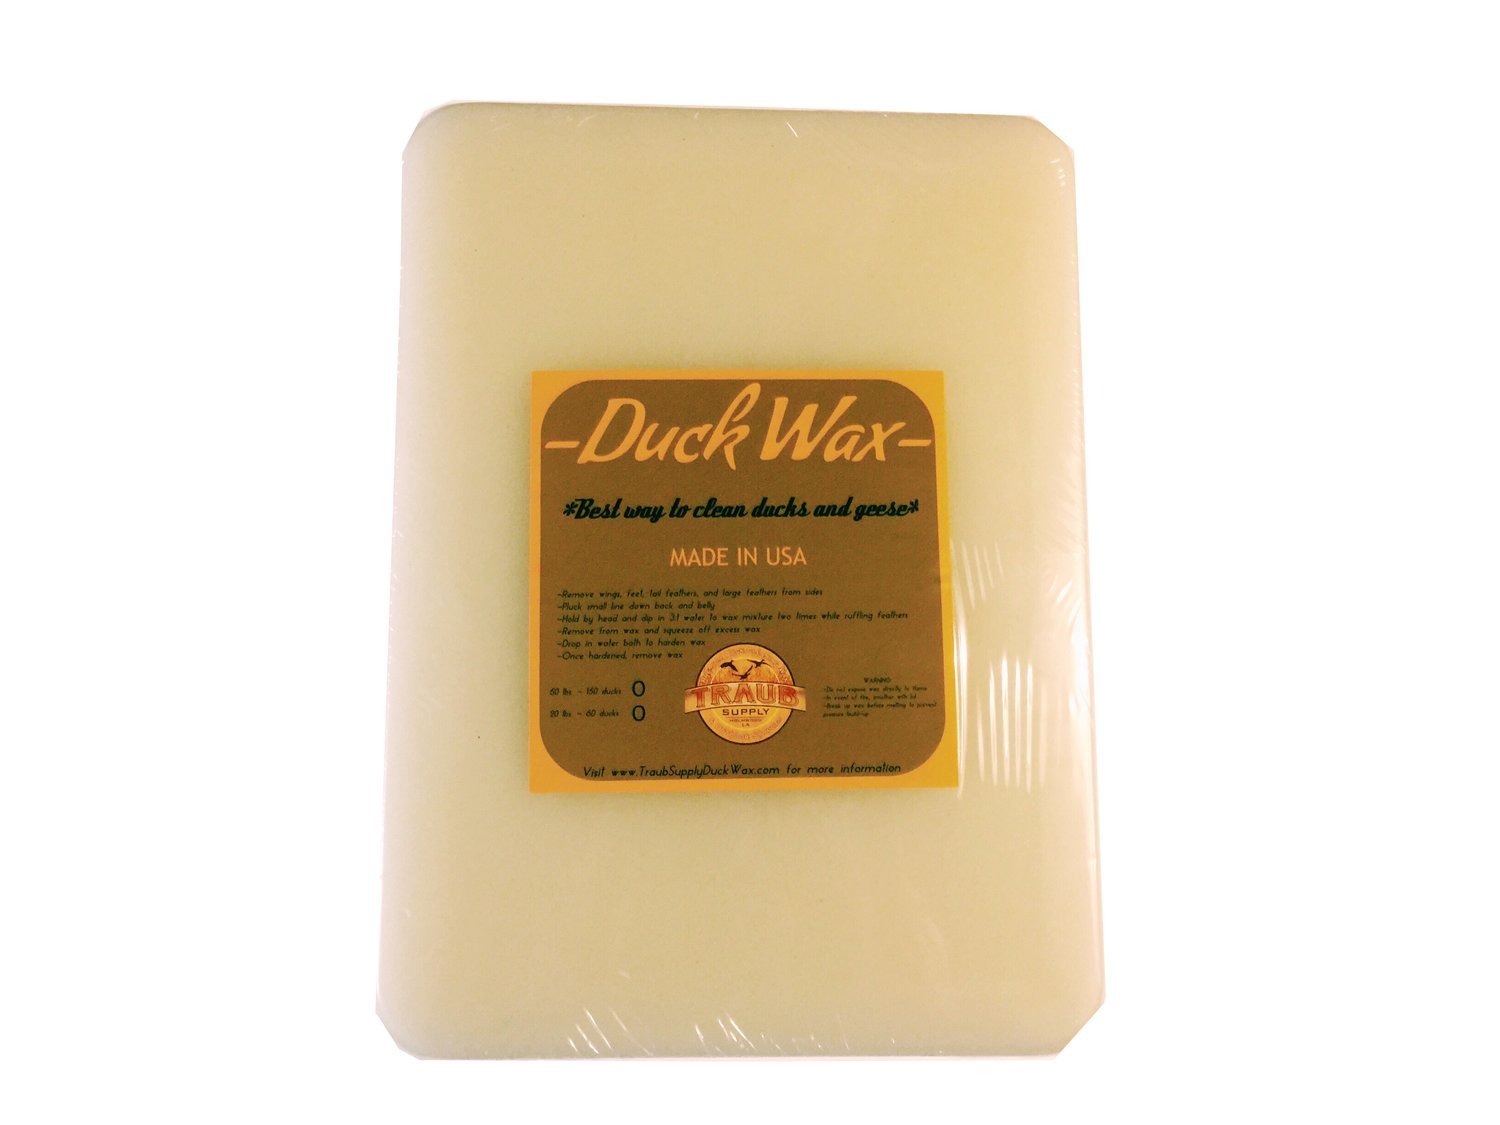 BUY NOW    -     5 slabs 55 lbs. Wild Duck Wax (CLEANS ABOUT 150 DUCKS) USA ONLY SHIPPING INCLUDED